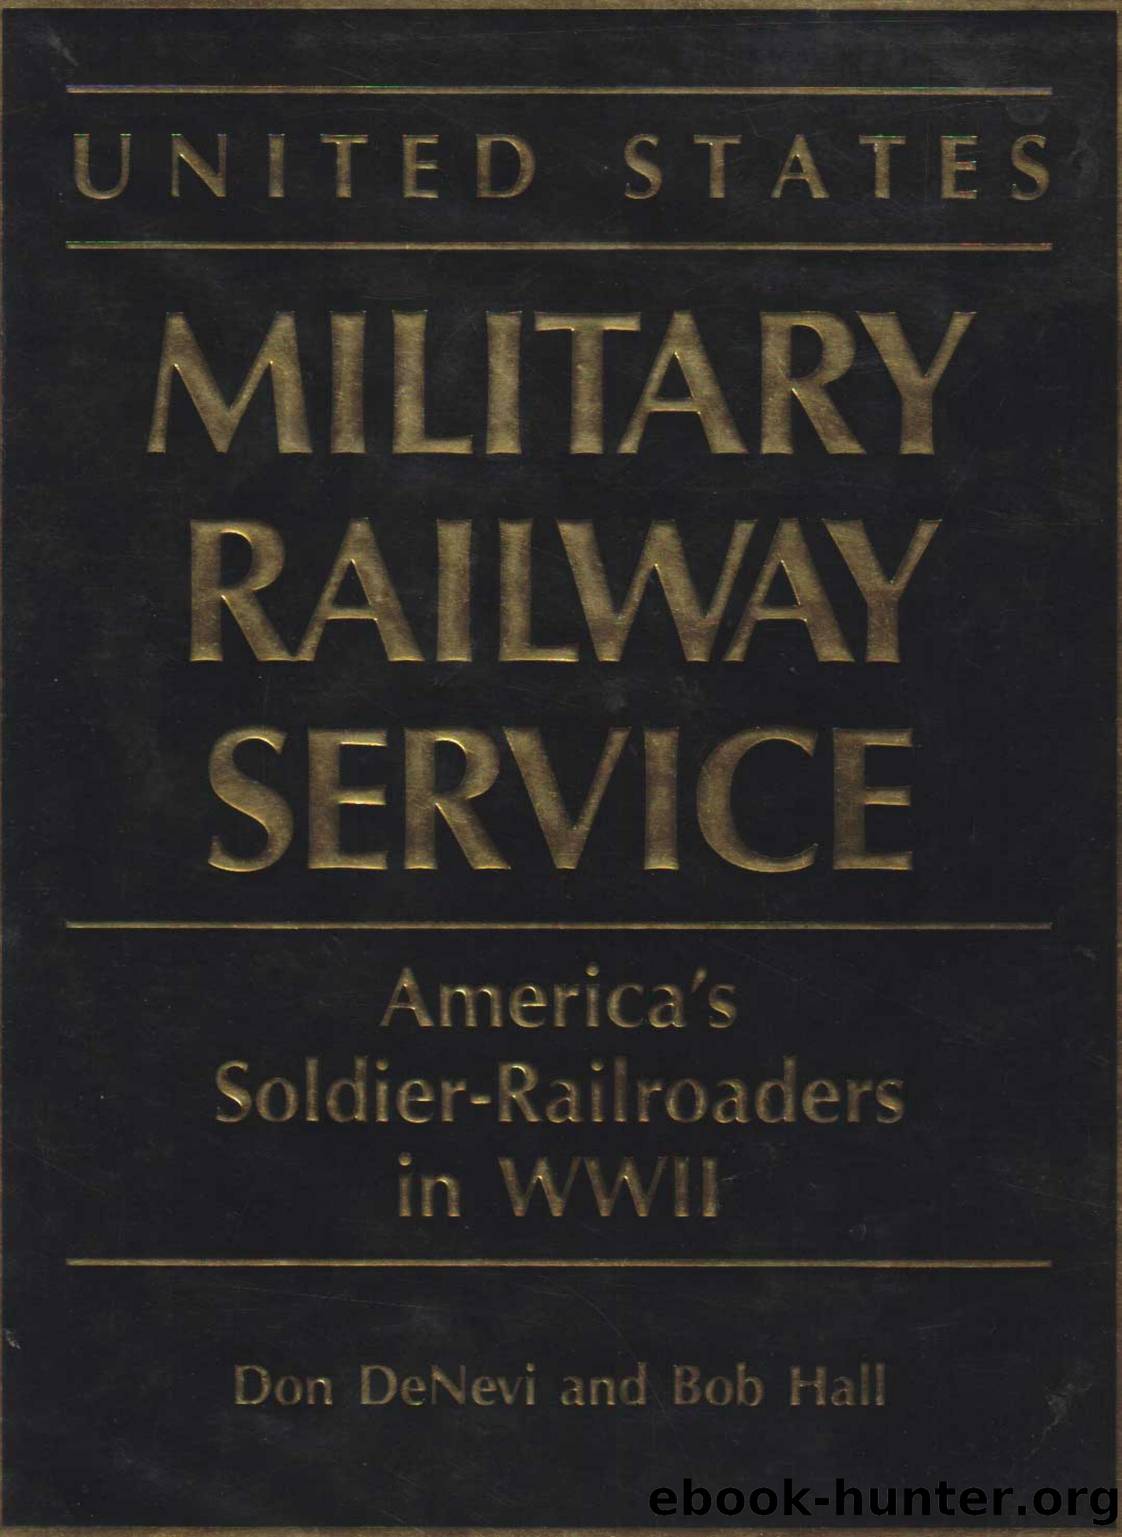 US Military Railway Service in WW II by Unknown